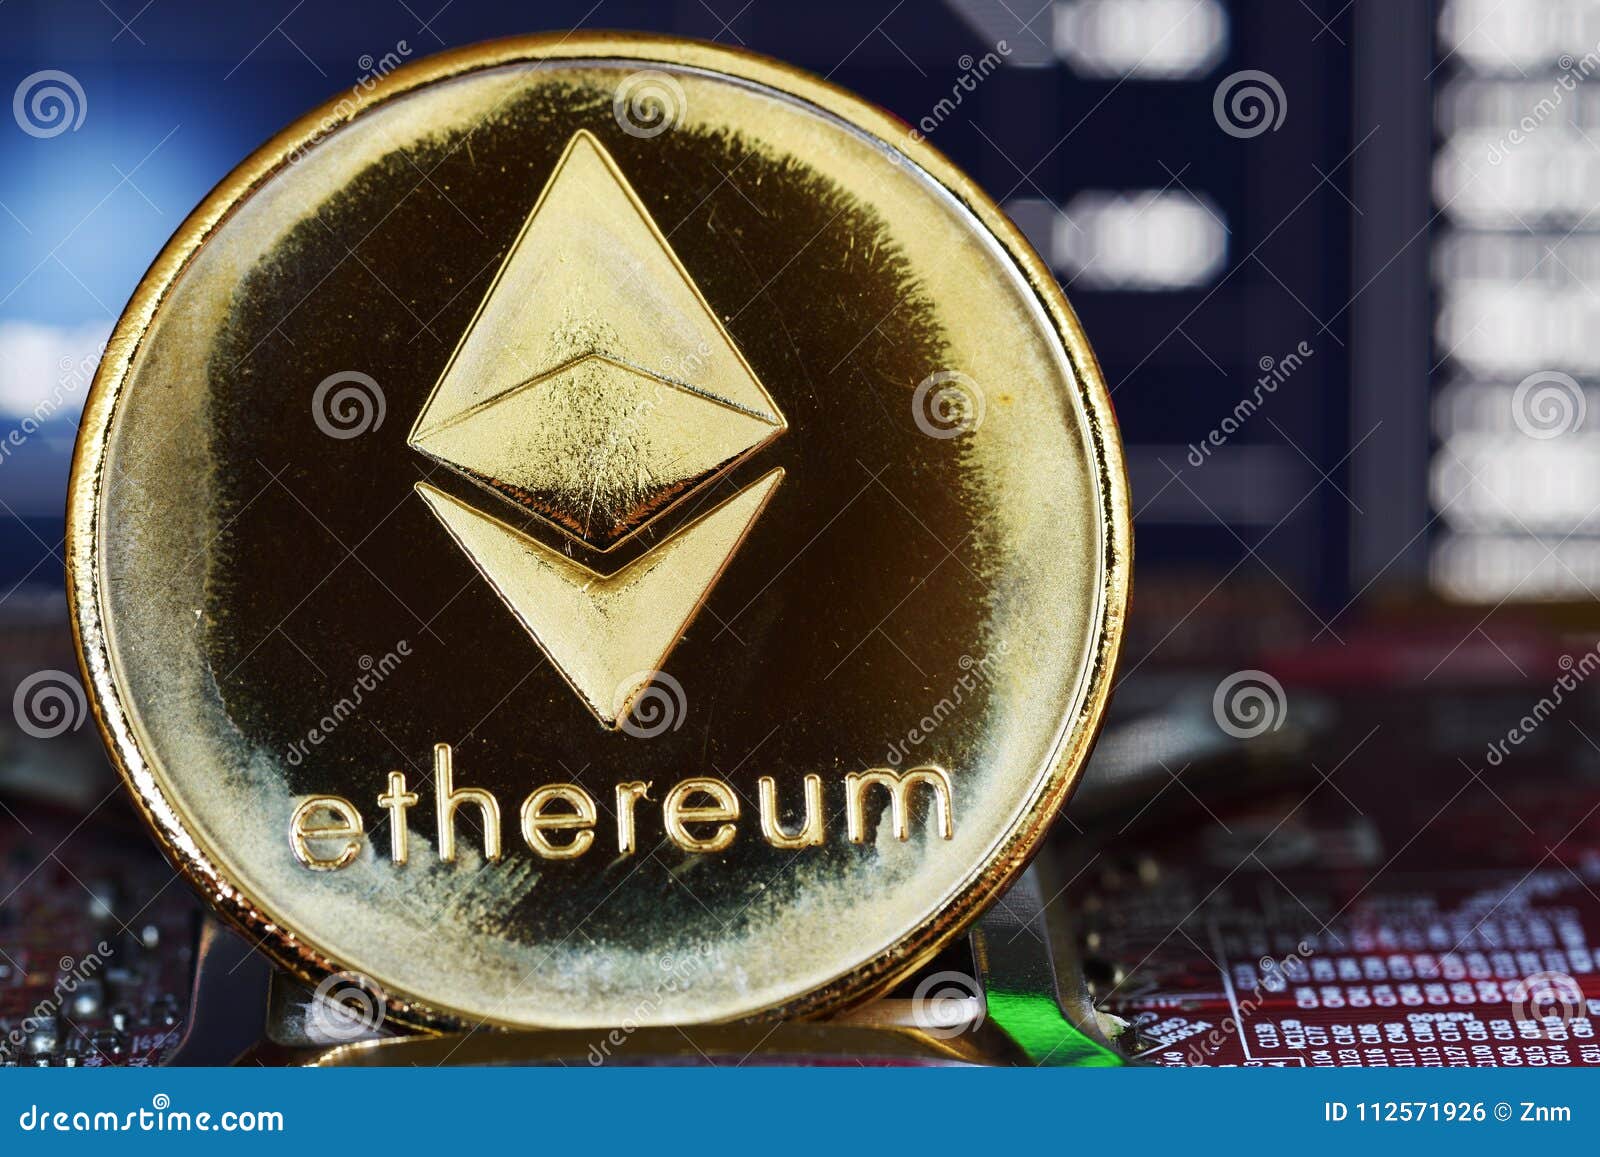 crypto coins based on ethereum